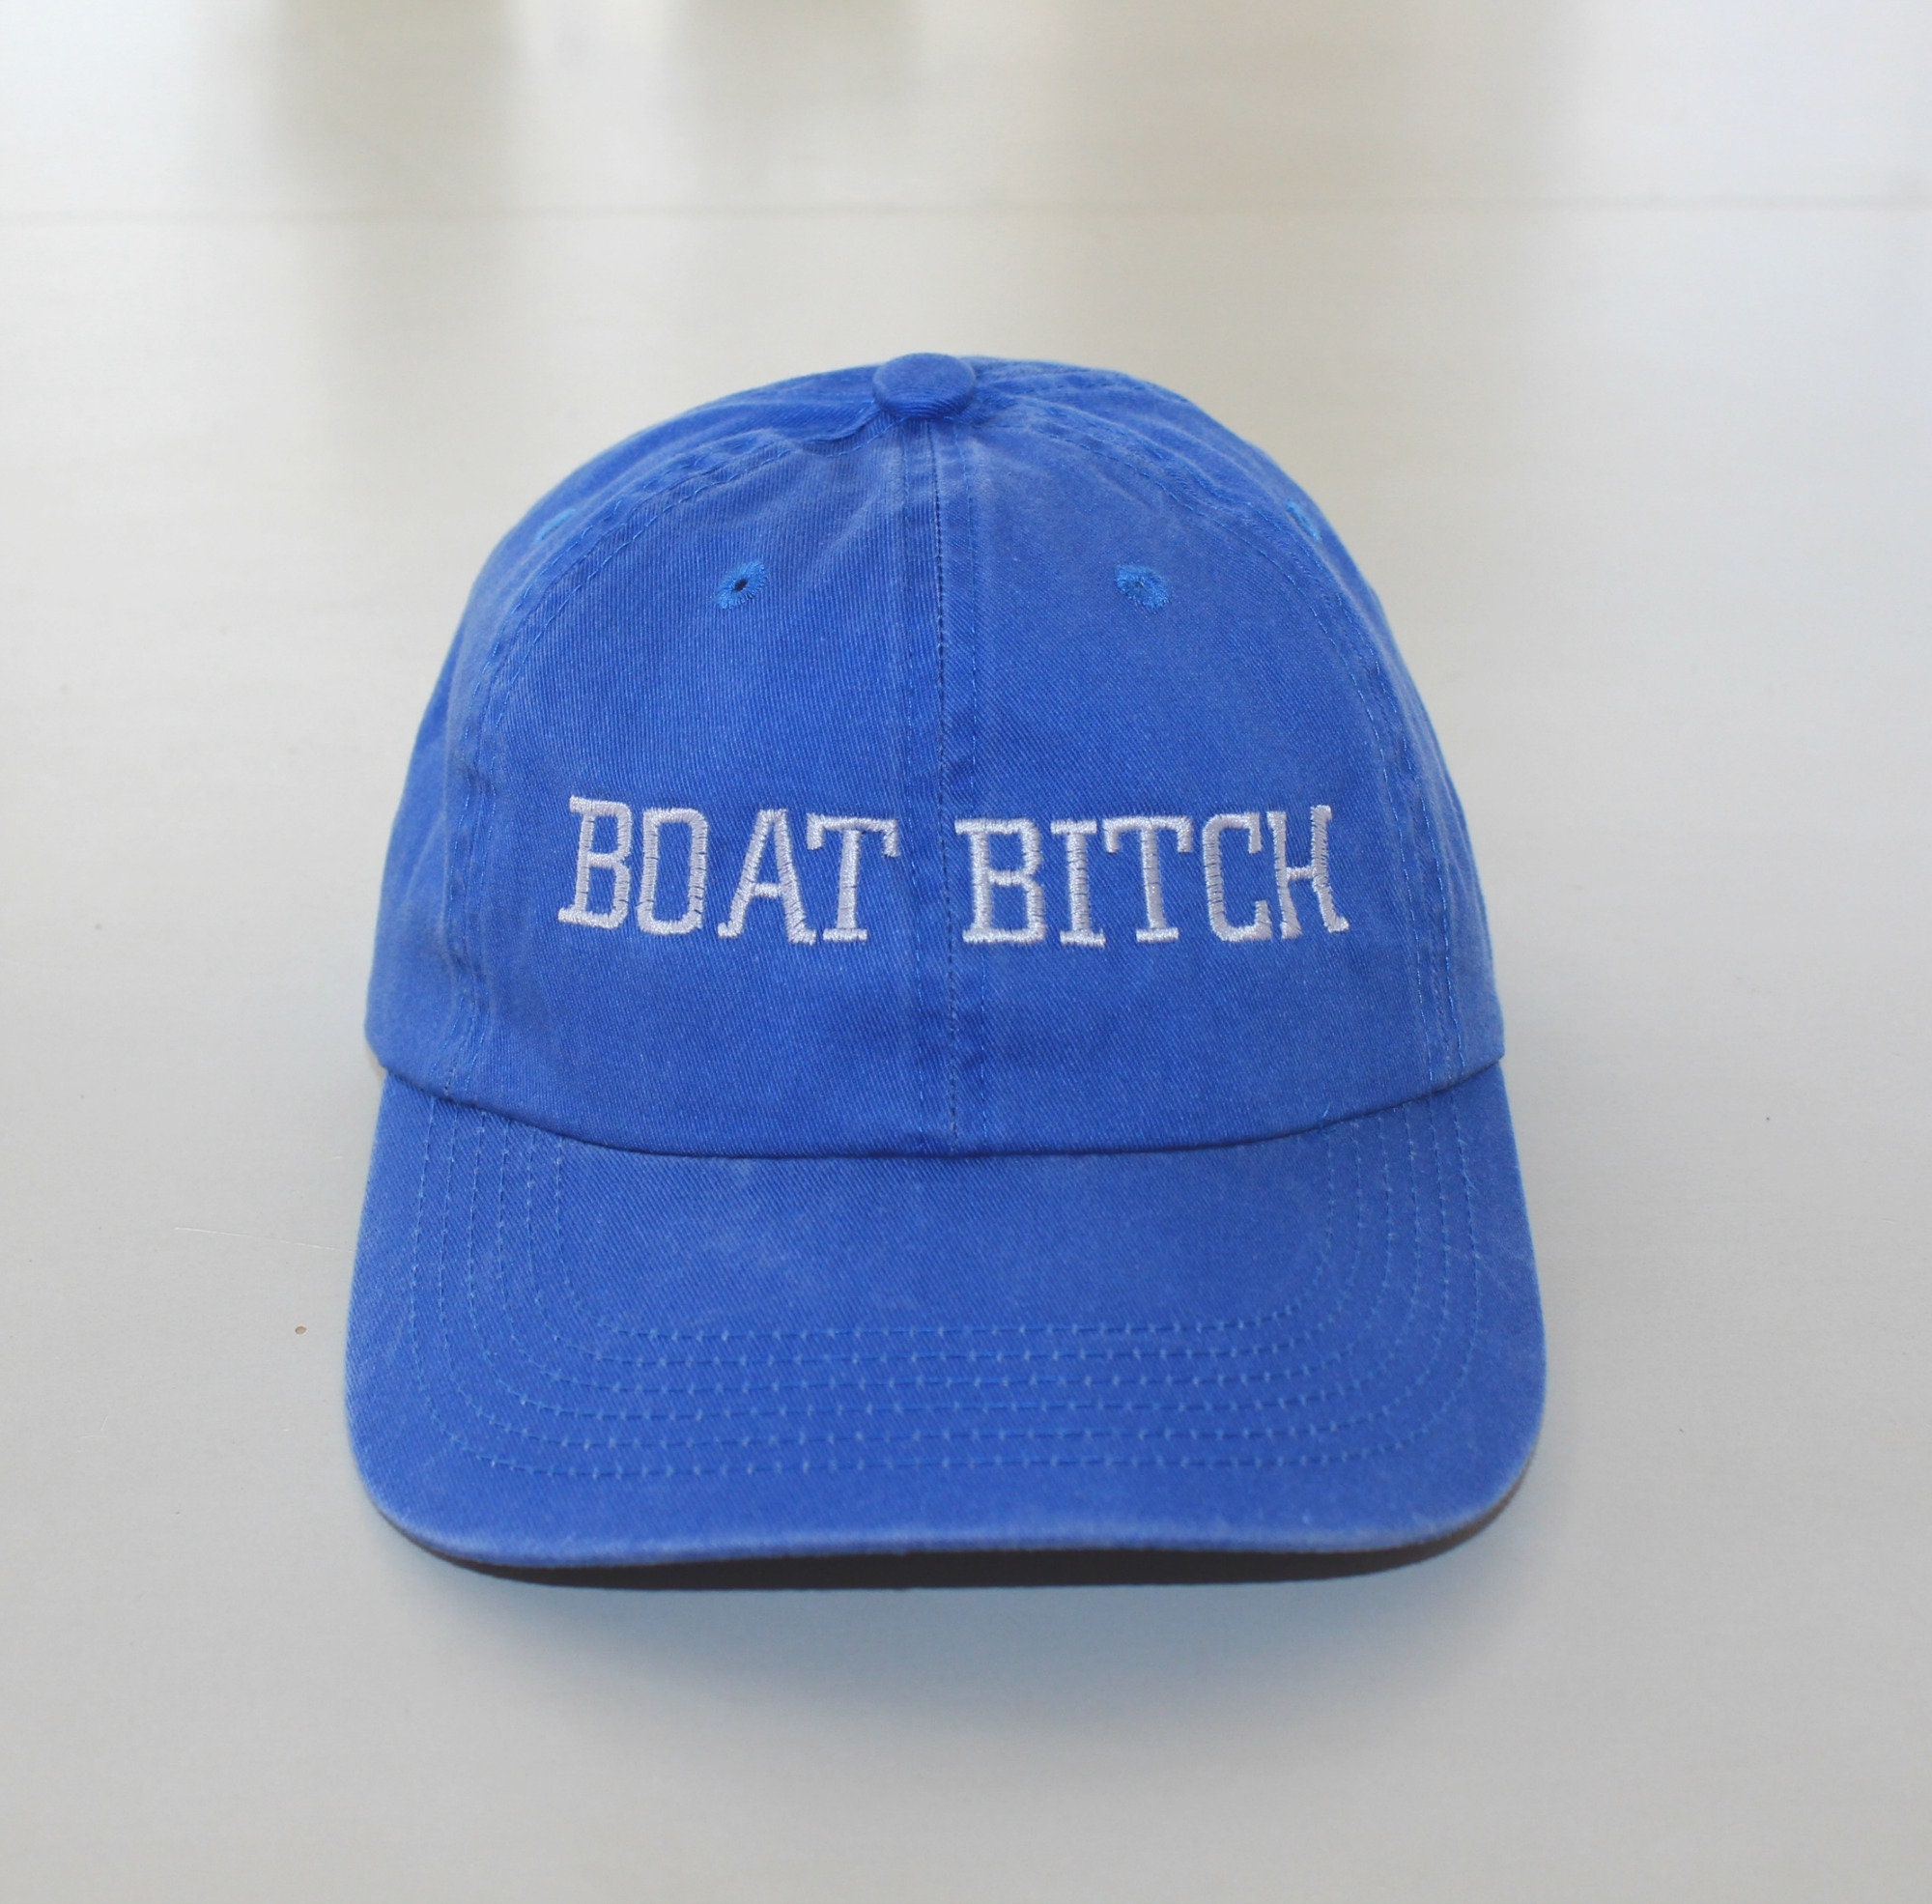 Boat Bitch Hat, Embroidered Hat, Bachelorette Party Hat, Low Profile Hat,  Pigment Dyed, Unstructured Ball Cap Distressed Vintage Look -  Canada